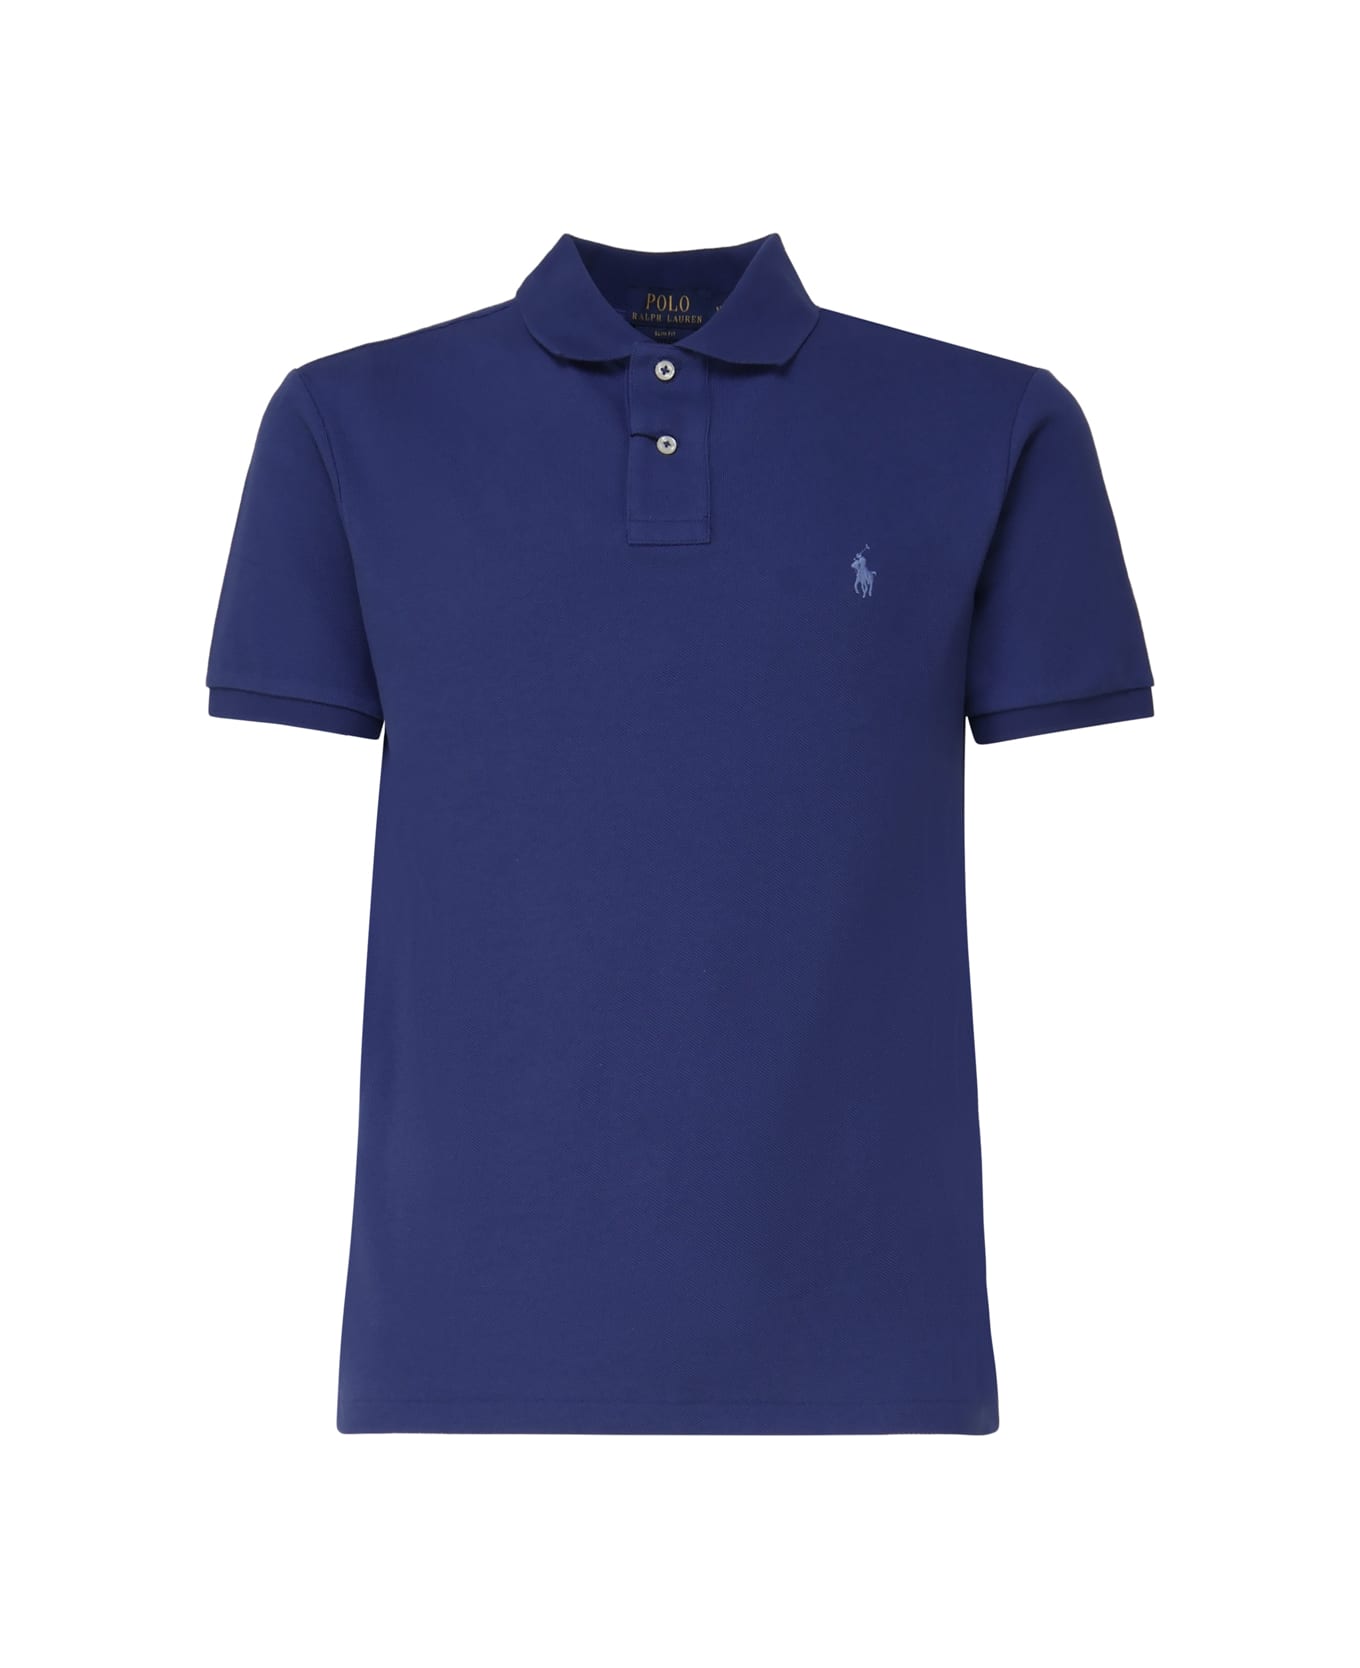 Polo Ralph Lauren Polo Shirt With Embroidery - Blue ポロシャツ